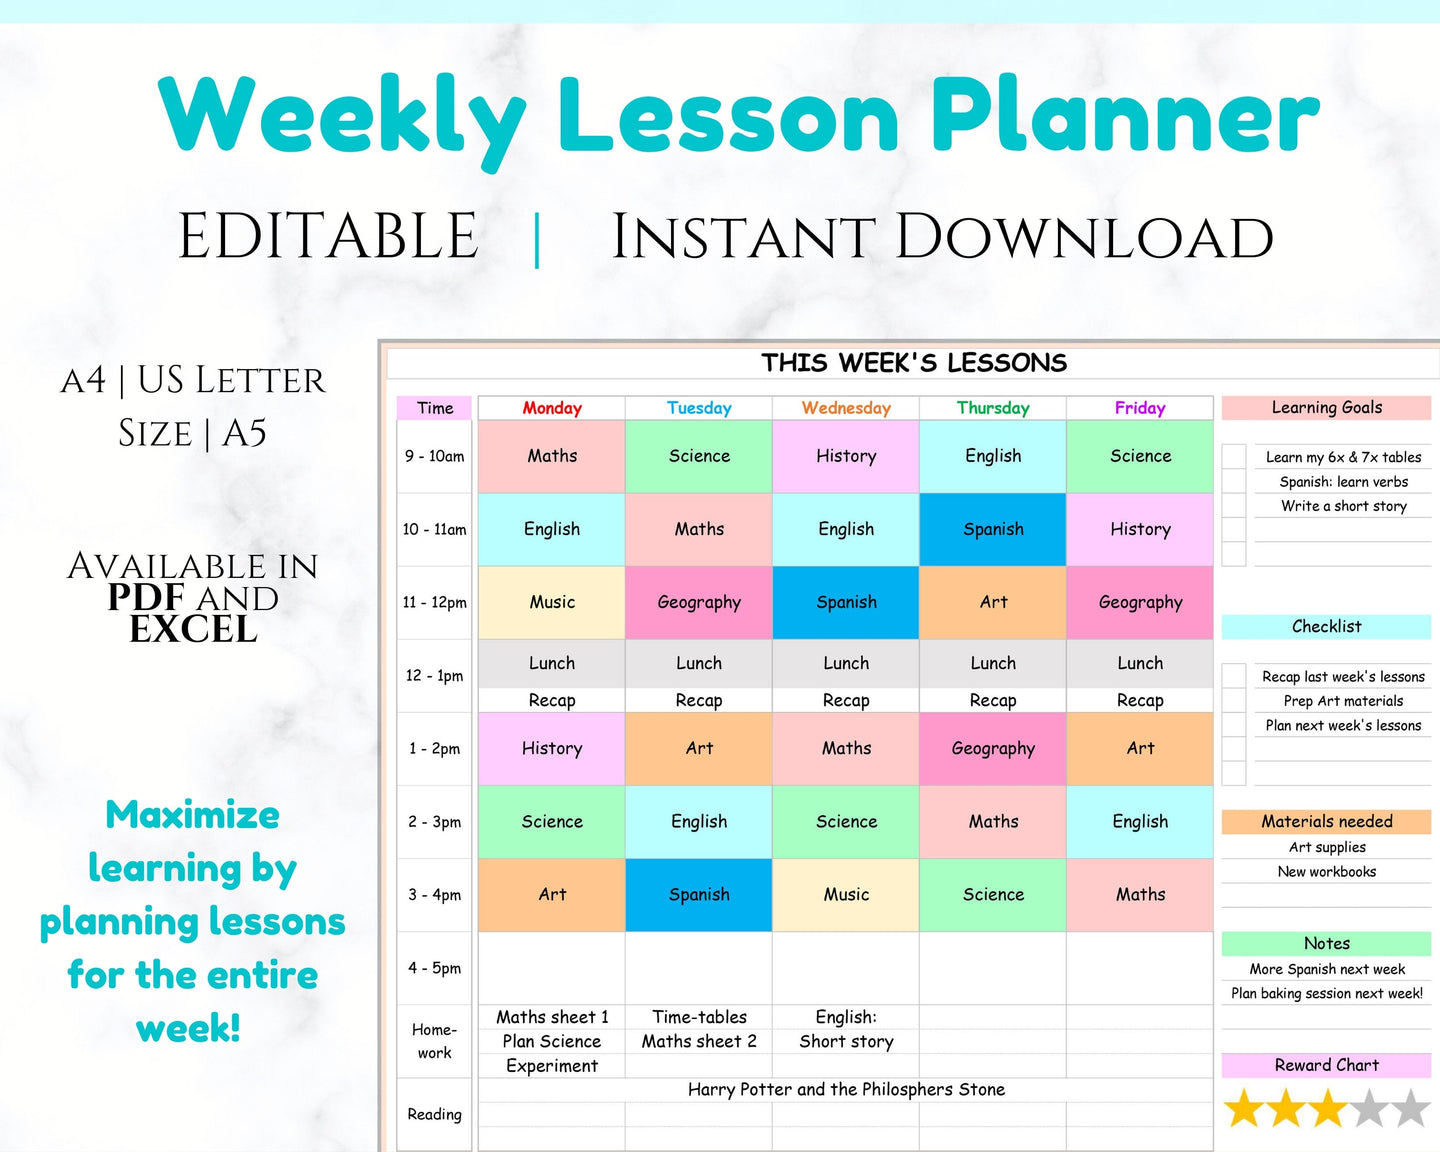 EDITABLE Weekly Homeschool LESSON PLANNER | Home schooling Lesson Plan | Printable Teaching Planner | Academic Classroom Curriculum Schedule